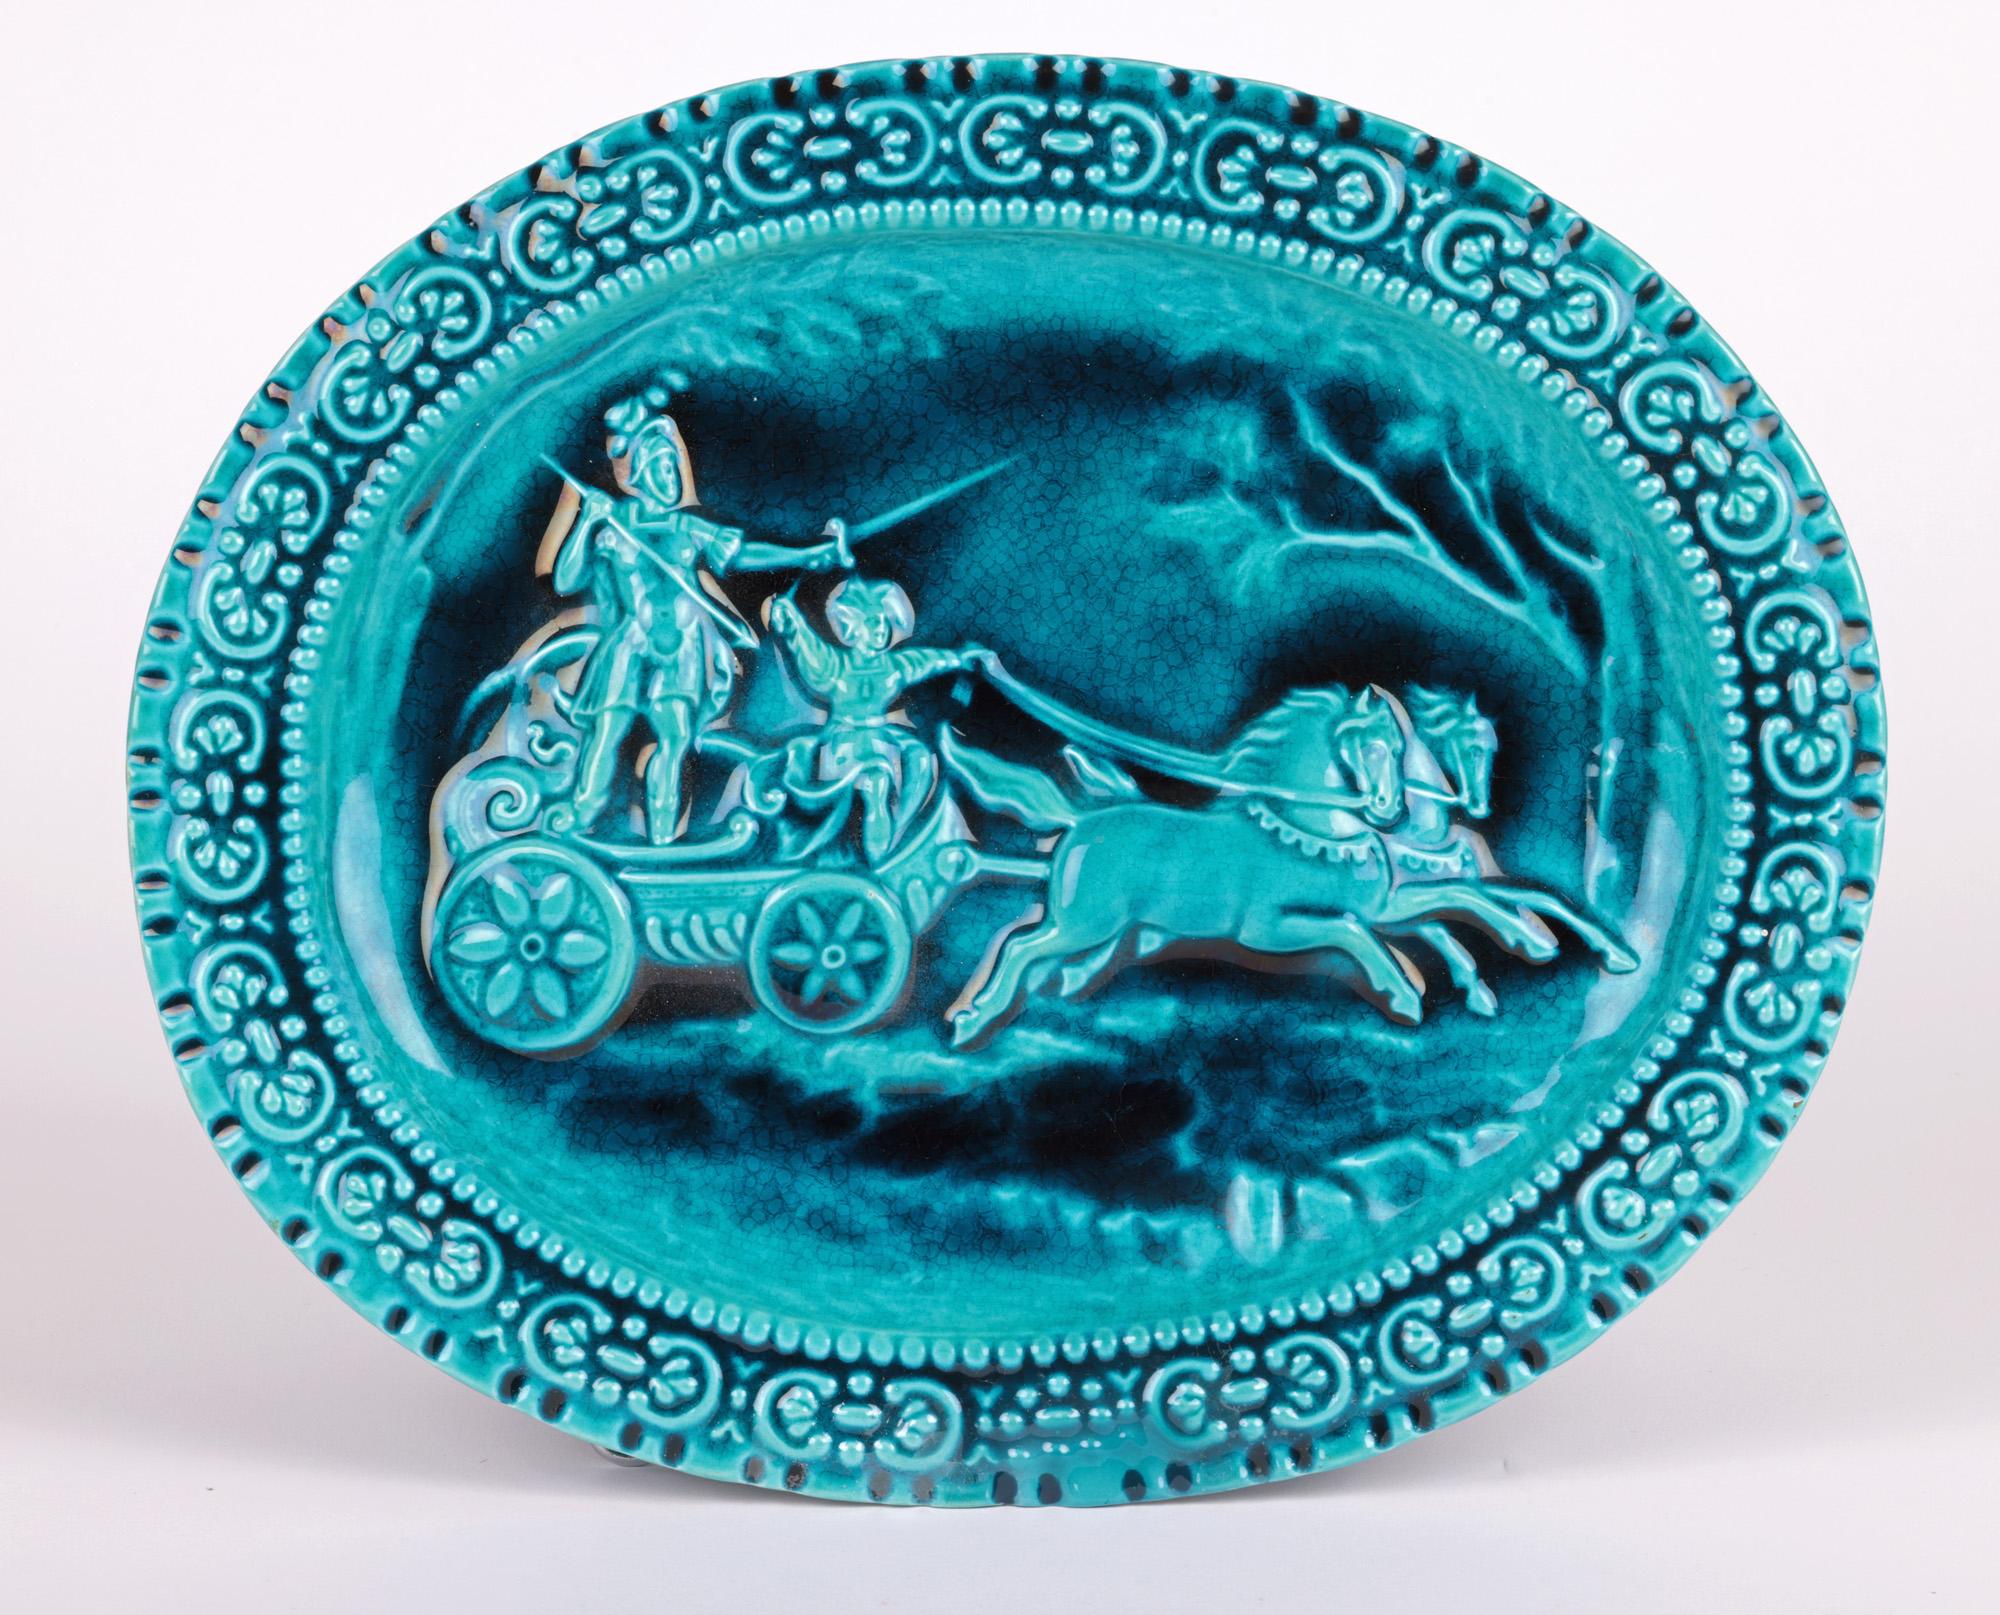 Aesthetic Movement Maw & Co Walter Crane Majolica Chariot Art Pottery Plaque For Sale